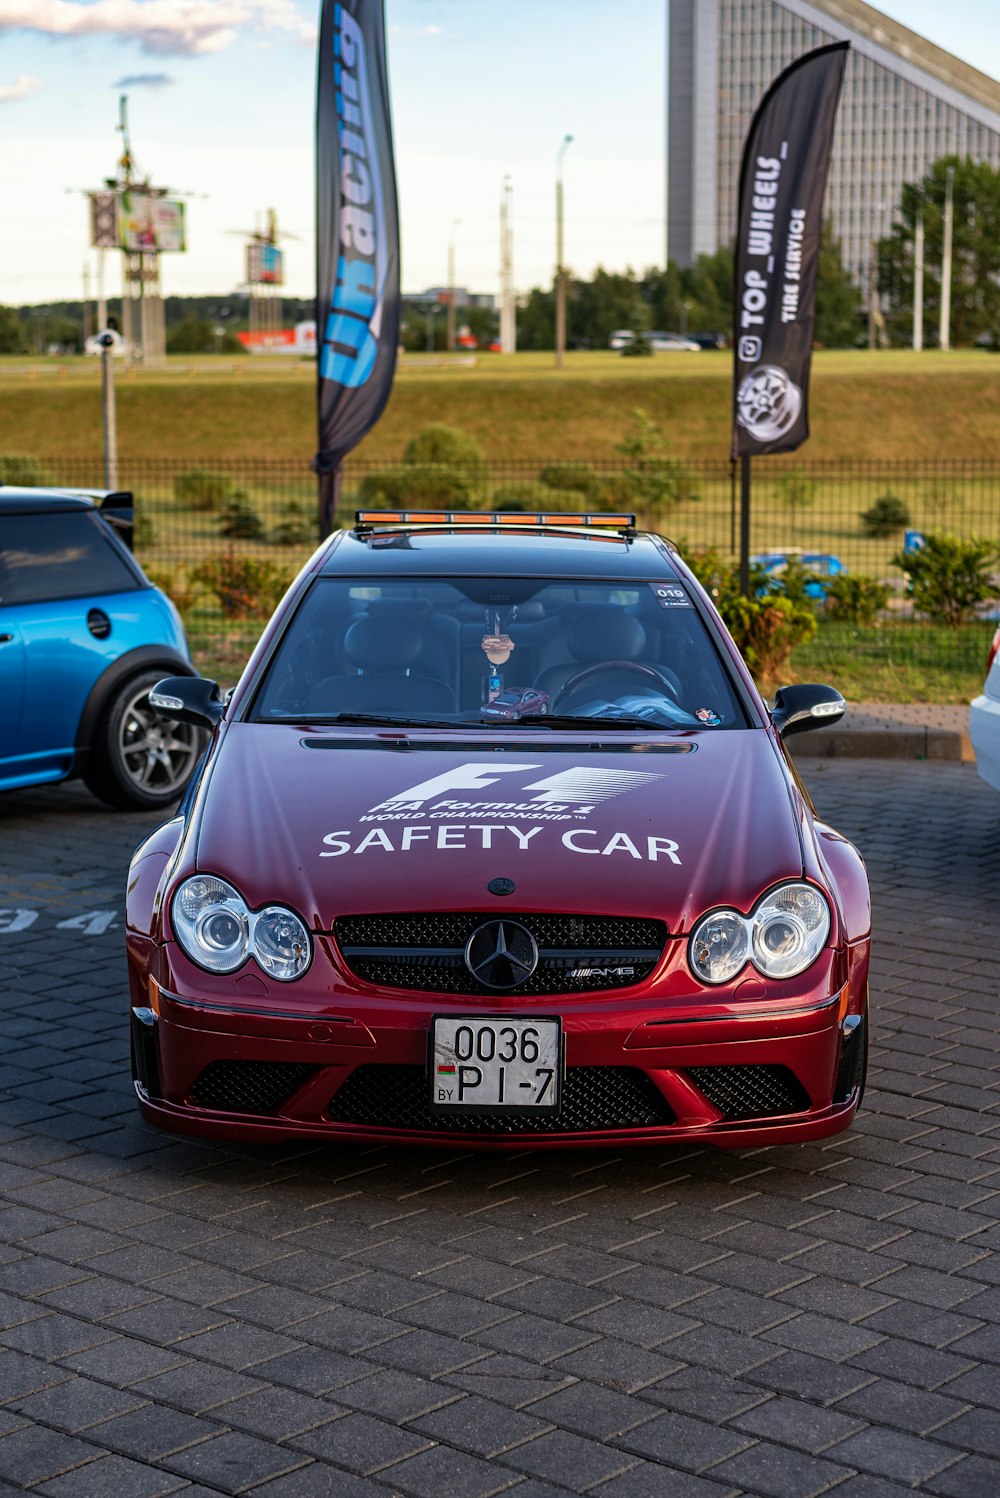 a red car with a safety car sticker on it